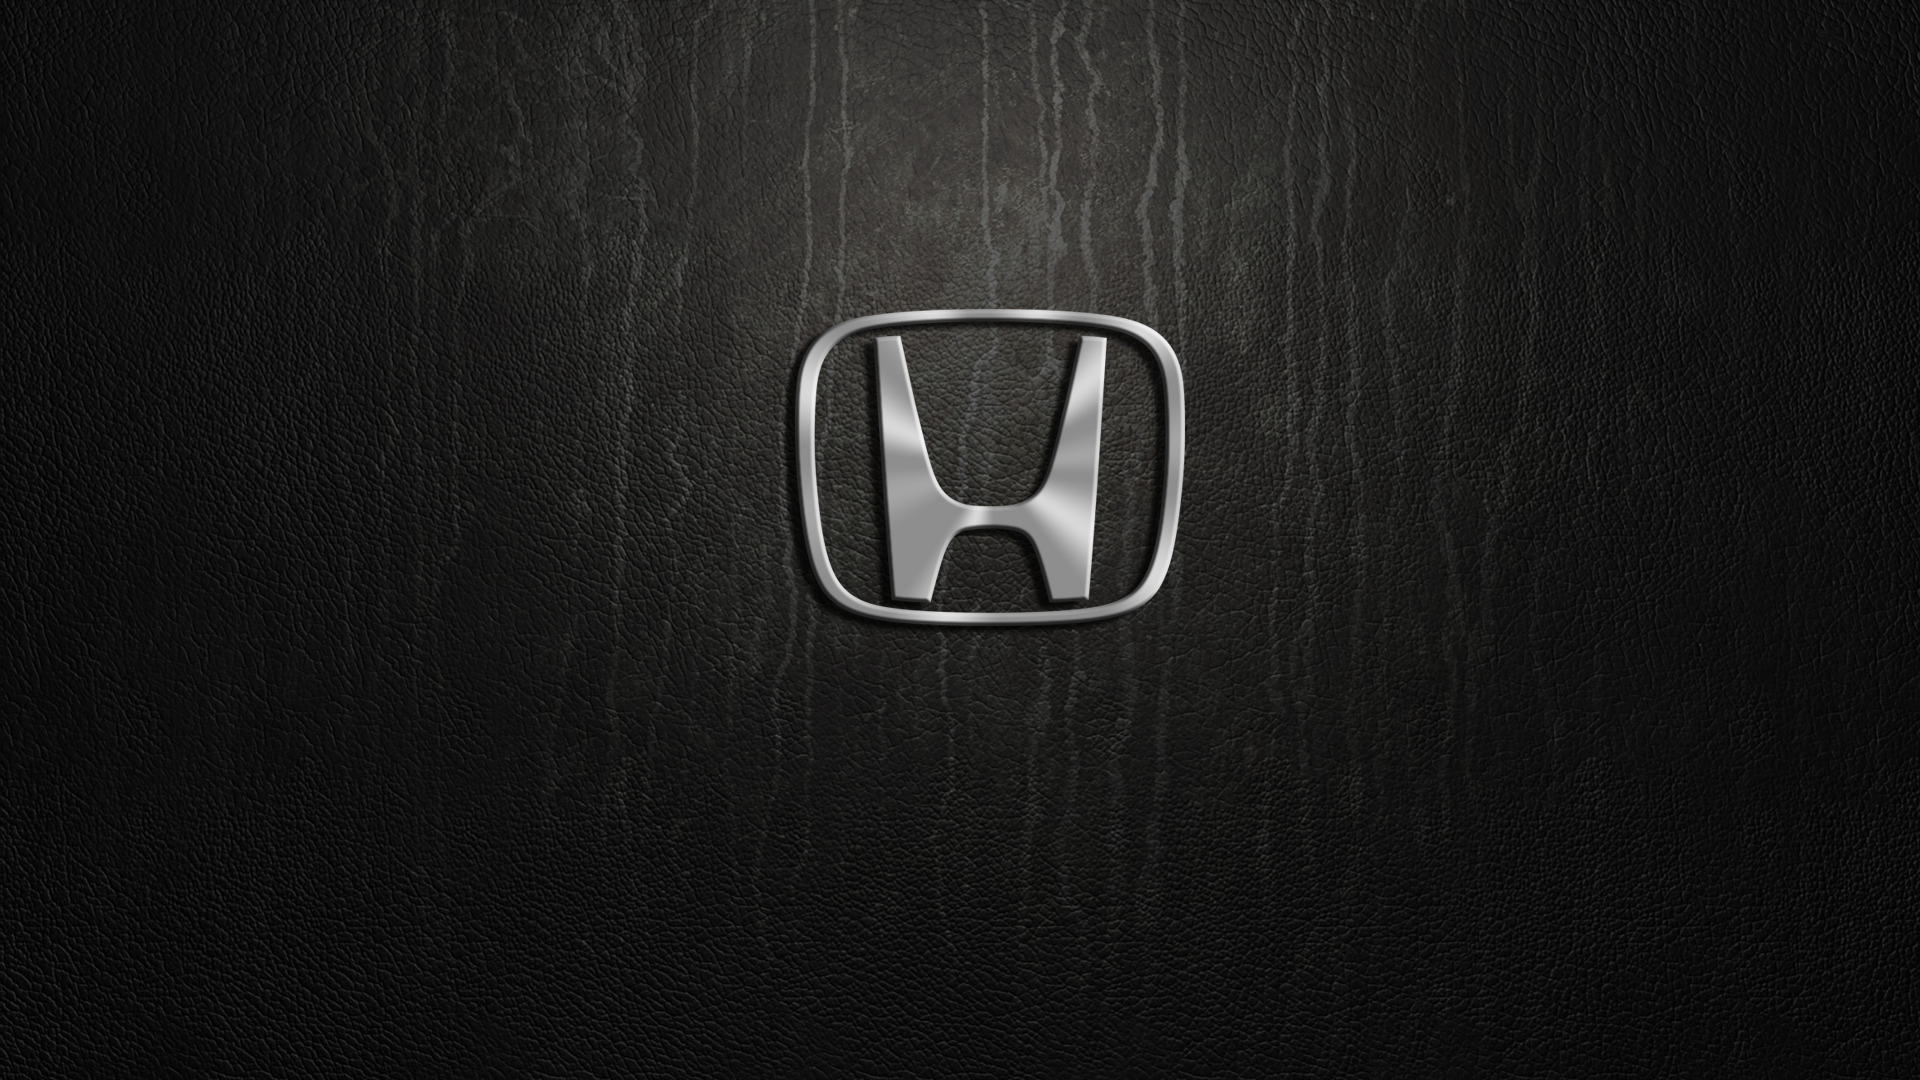 Honda hd papers and backgrounds